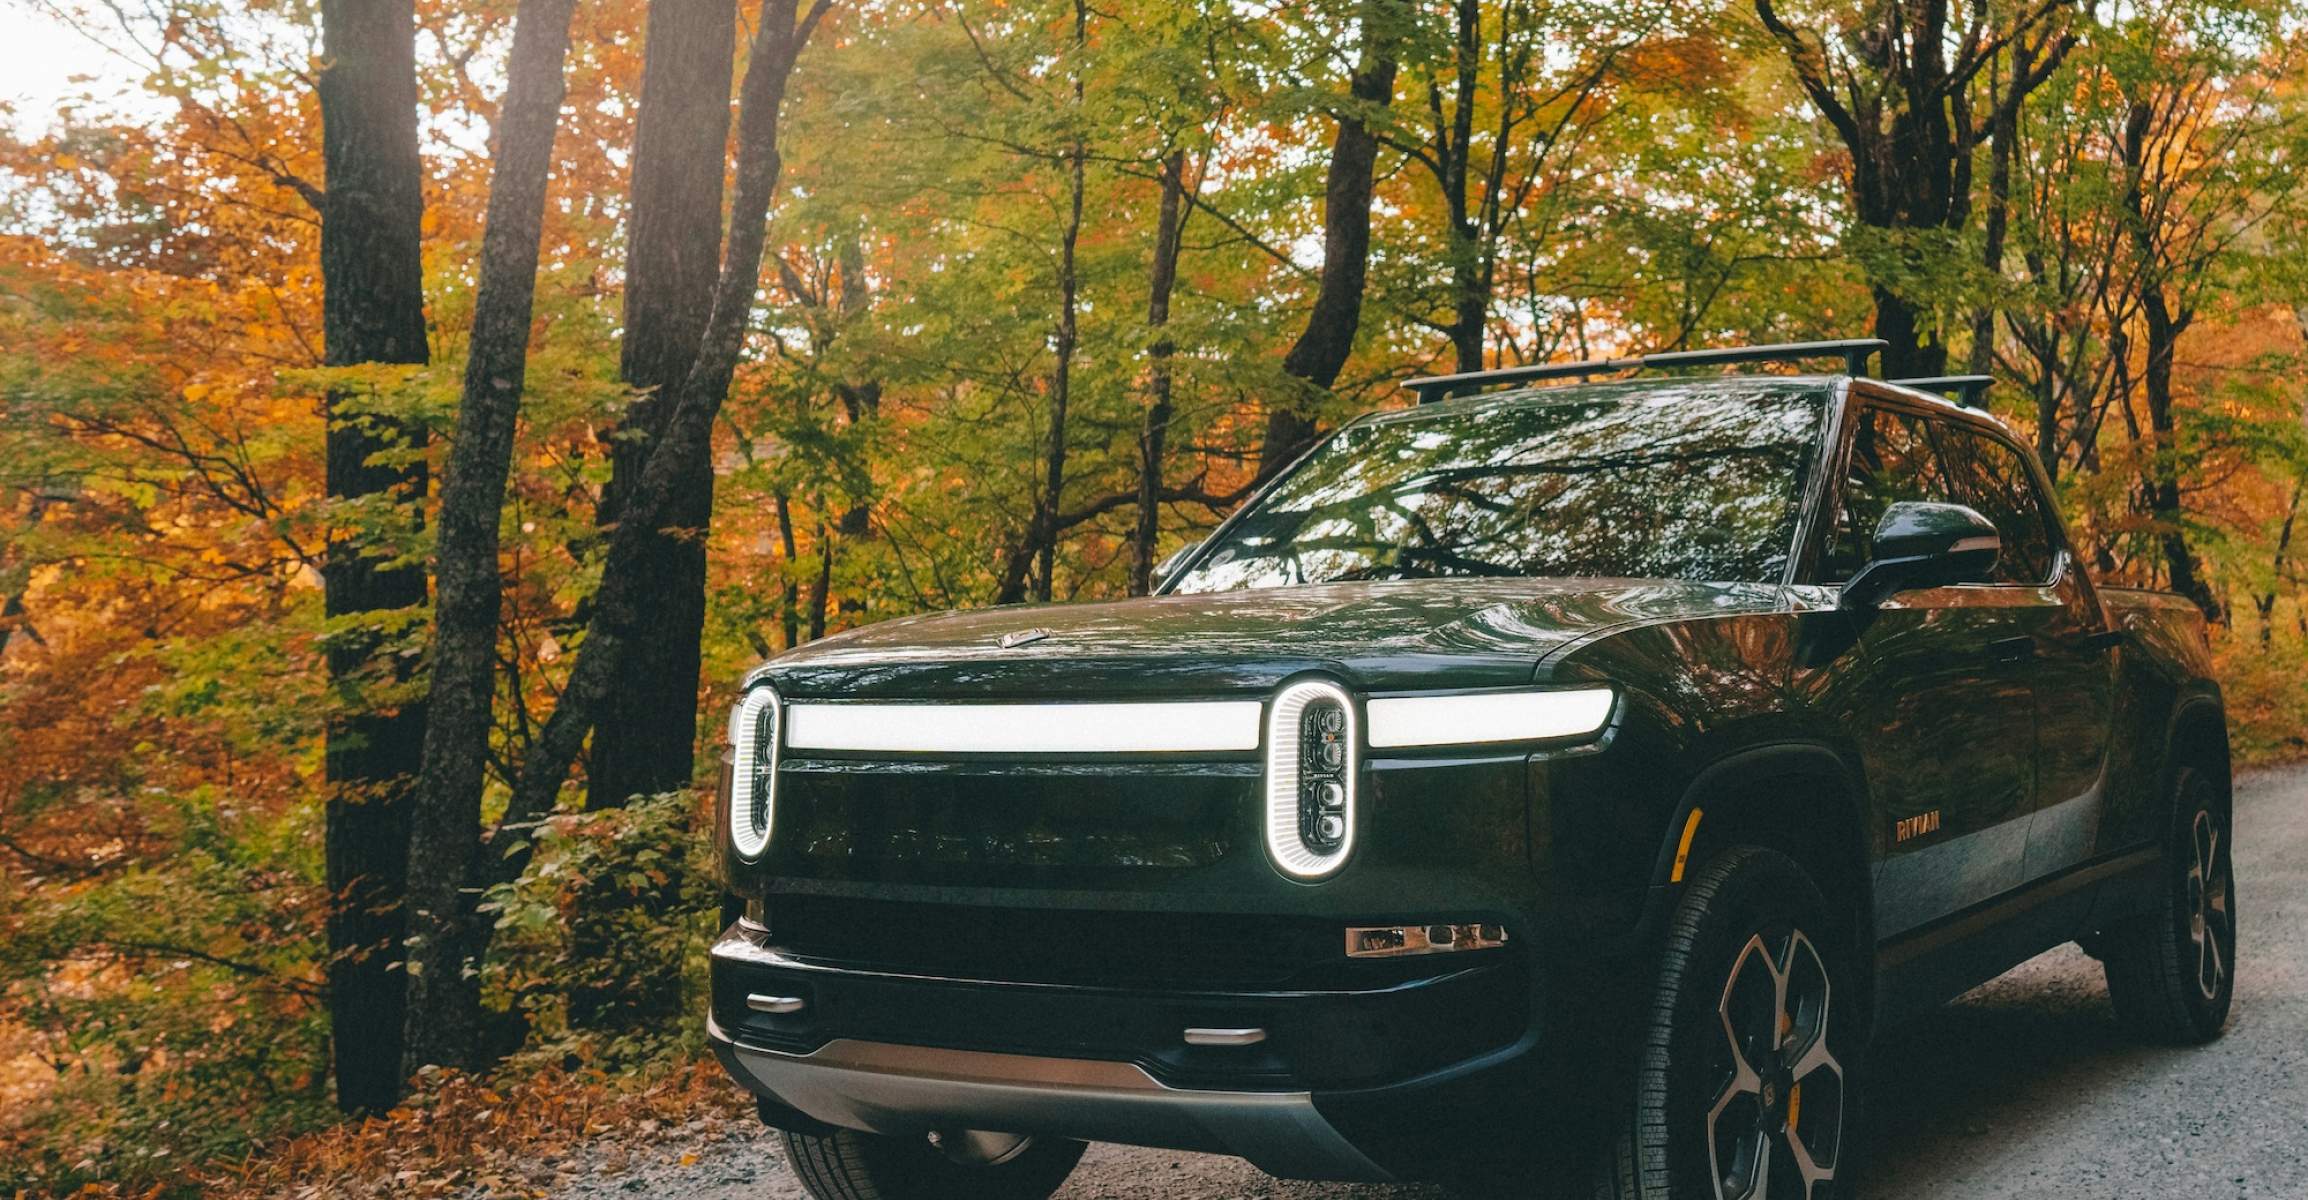 Rivian Electric Vehicle Driving on a Gravel Road